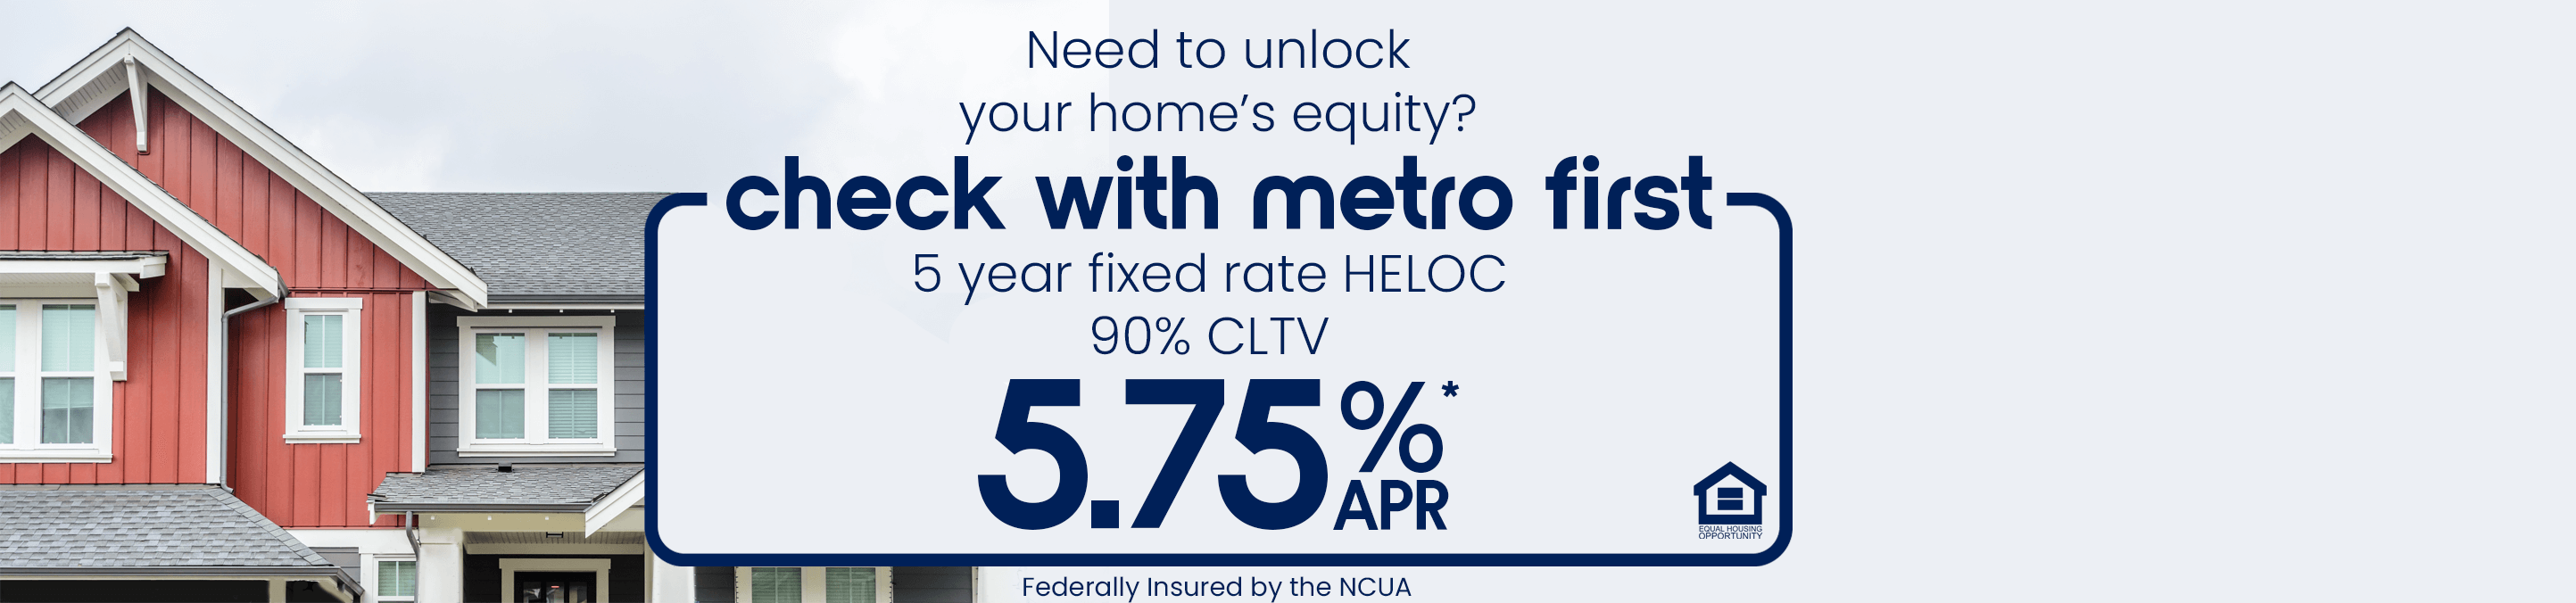 Need to unlock your home's equity? check with metro first!